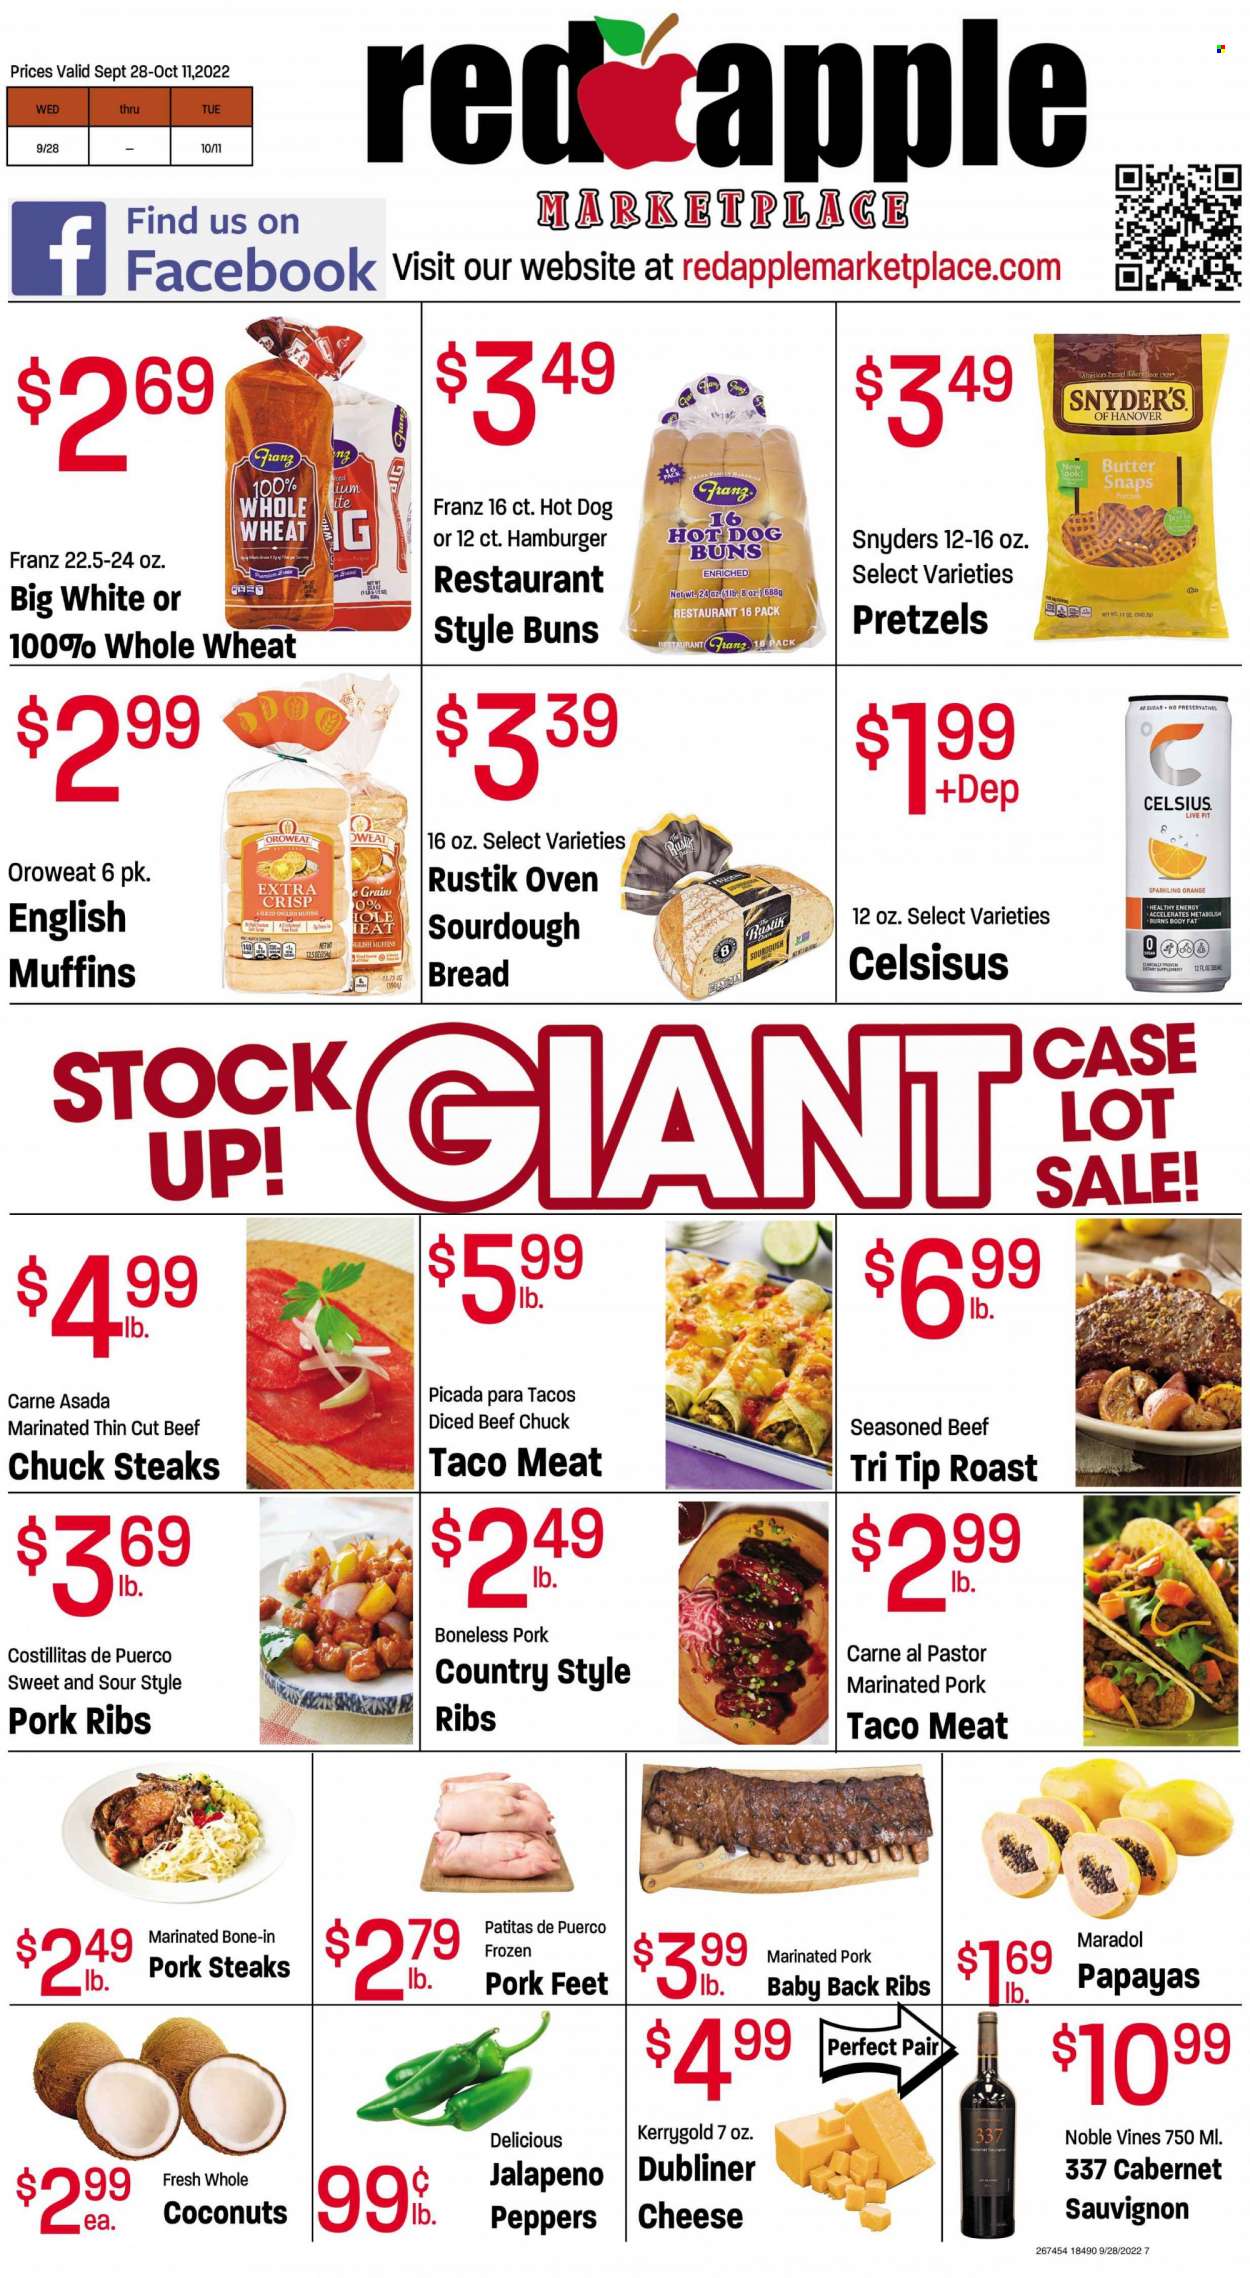 thumbnail - Red Apple Marketplace Flyer - 09/28/2022 - 10/11/2022 - Sales products - bread, english muffins, pretzels, buns, sourdough bread, jalapeño, oranges, coconut, hamburger, cheese, butter, Cabernet Sauvignon, red wine, wine, beef meat, steak, diced beef, pork chops, pork meat, pork ribs, pork back ribs, marinated pork, country style ribs. Page 8.